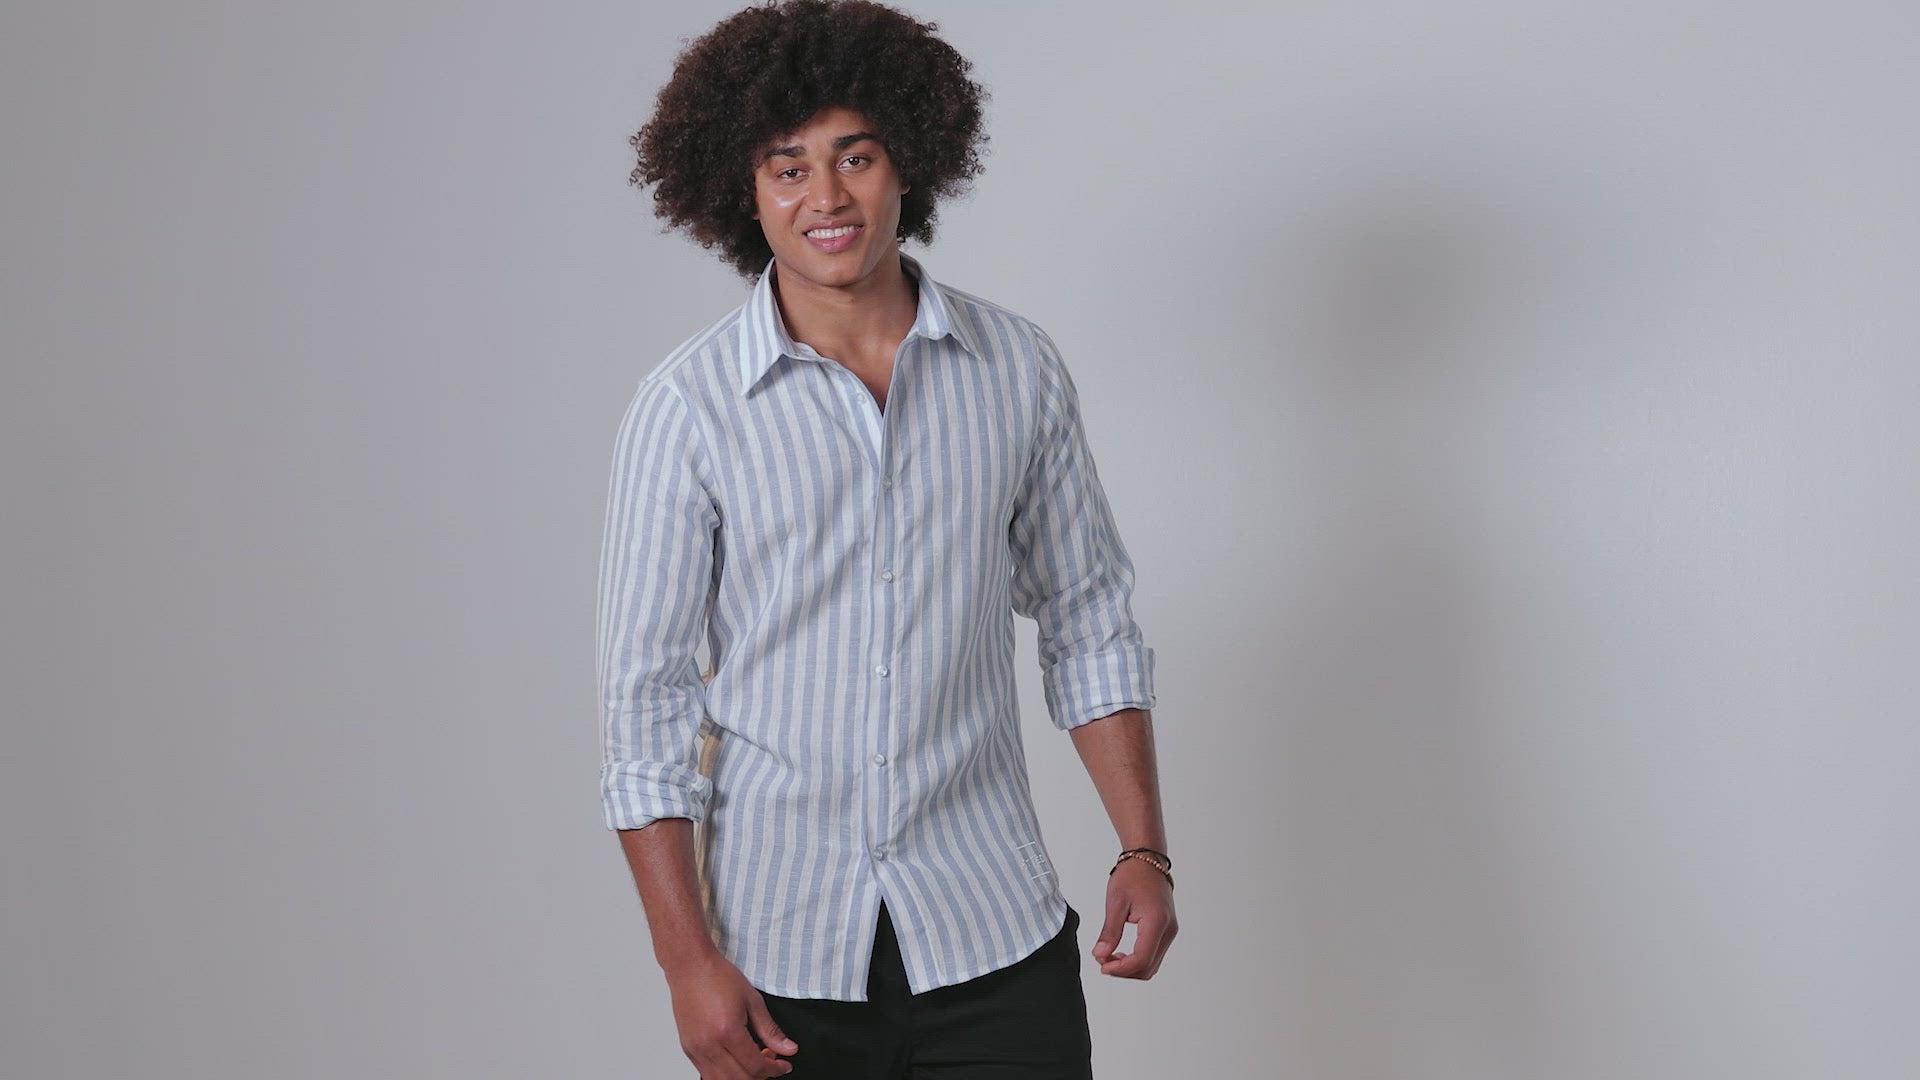 sky and white stripe Linen Shirt for Men long sleeve button up video